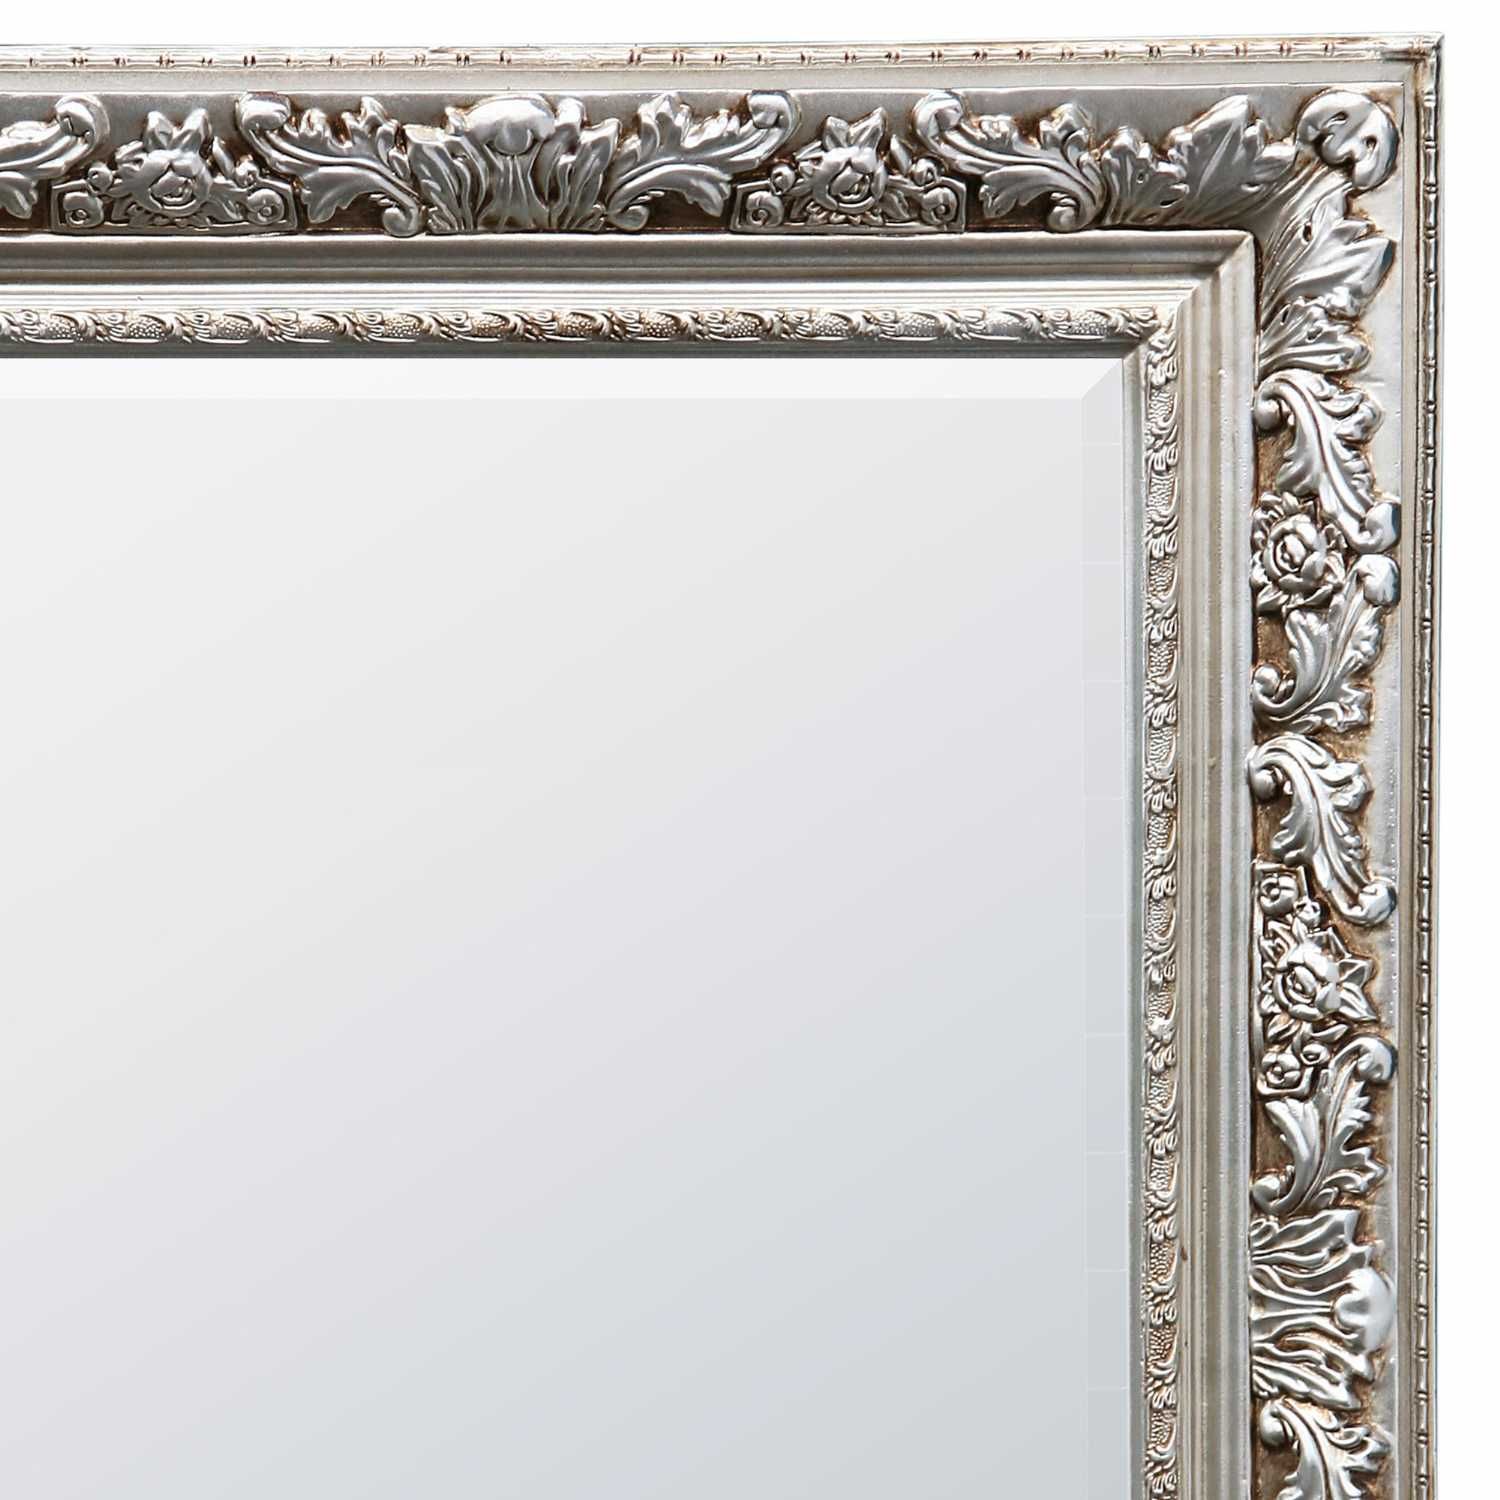 Antique Silver Decorative Leaf Design Framed Bevelled Wall Mirror Within Butterfly Gold Leaf Wall Mirrors (View 12 of 15)